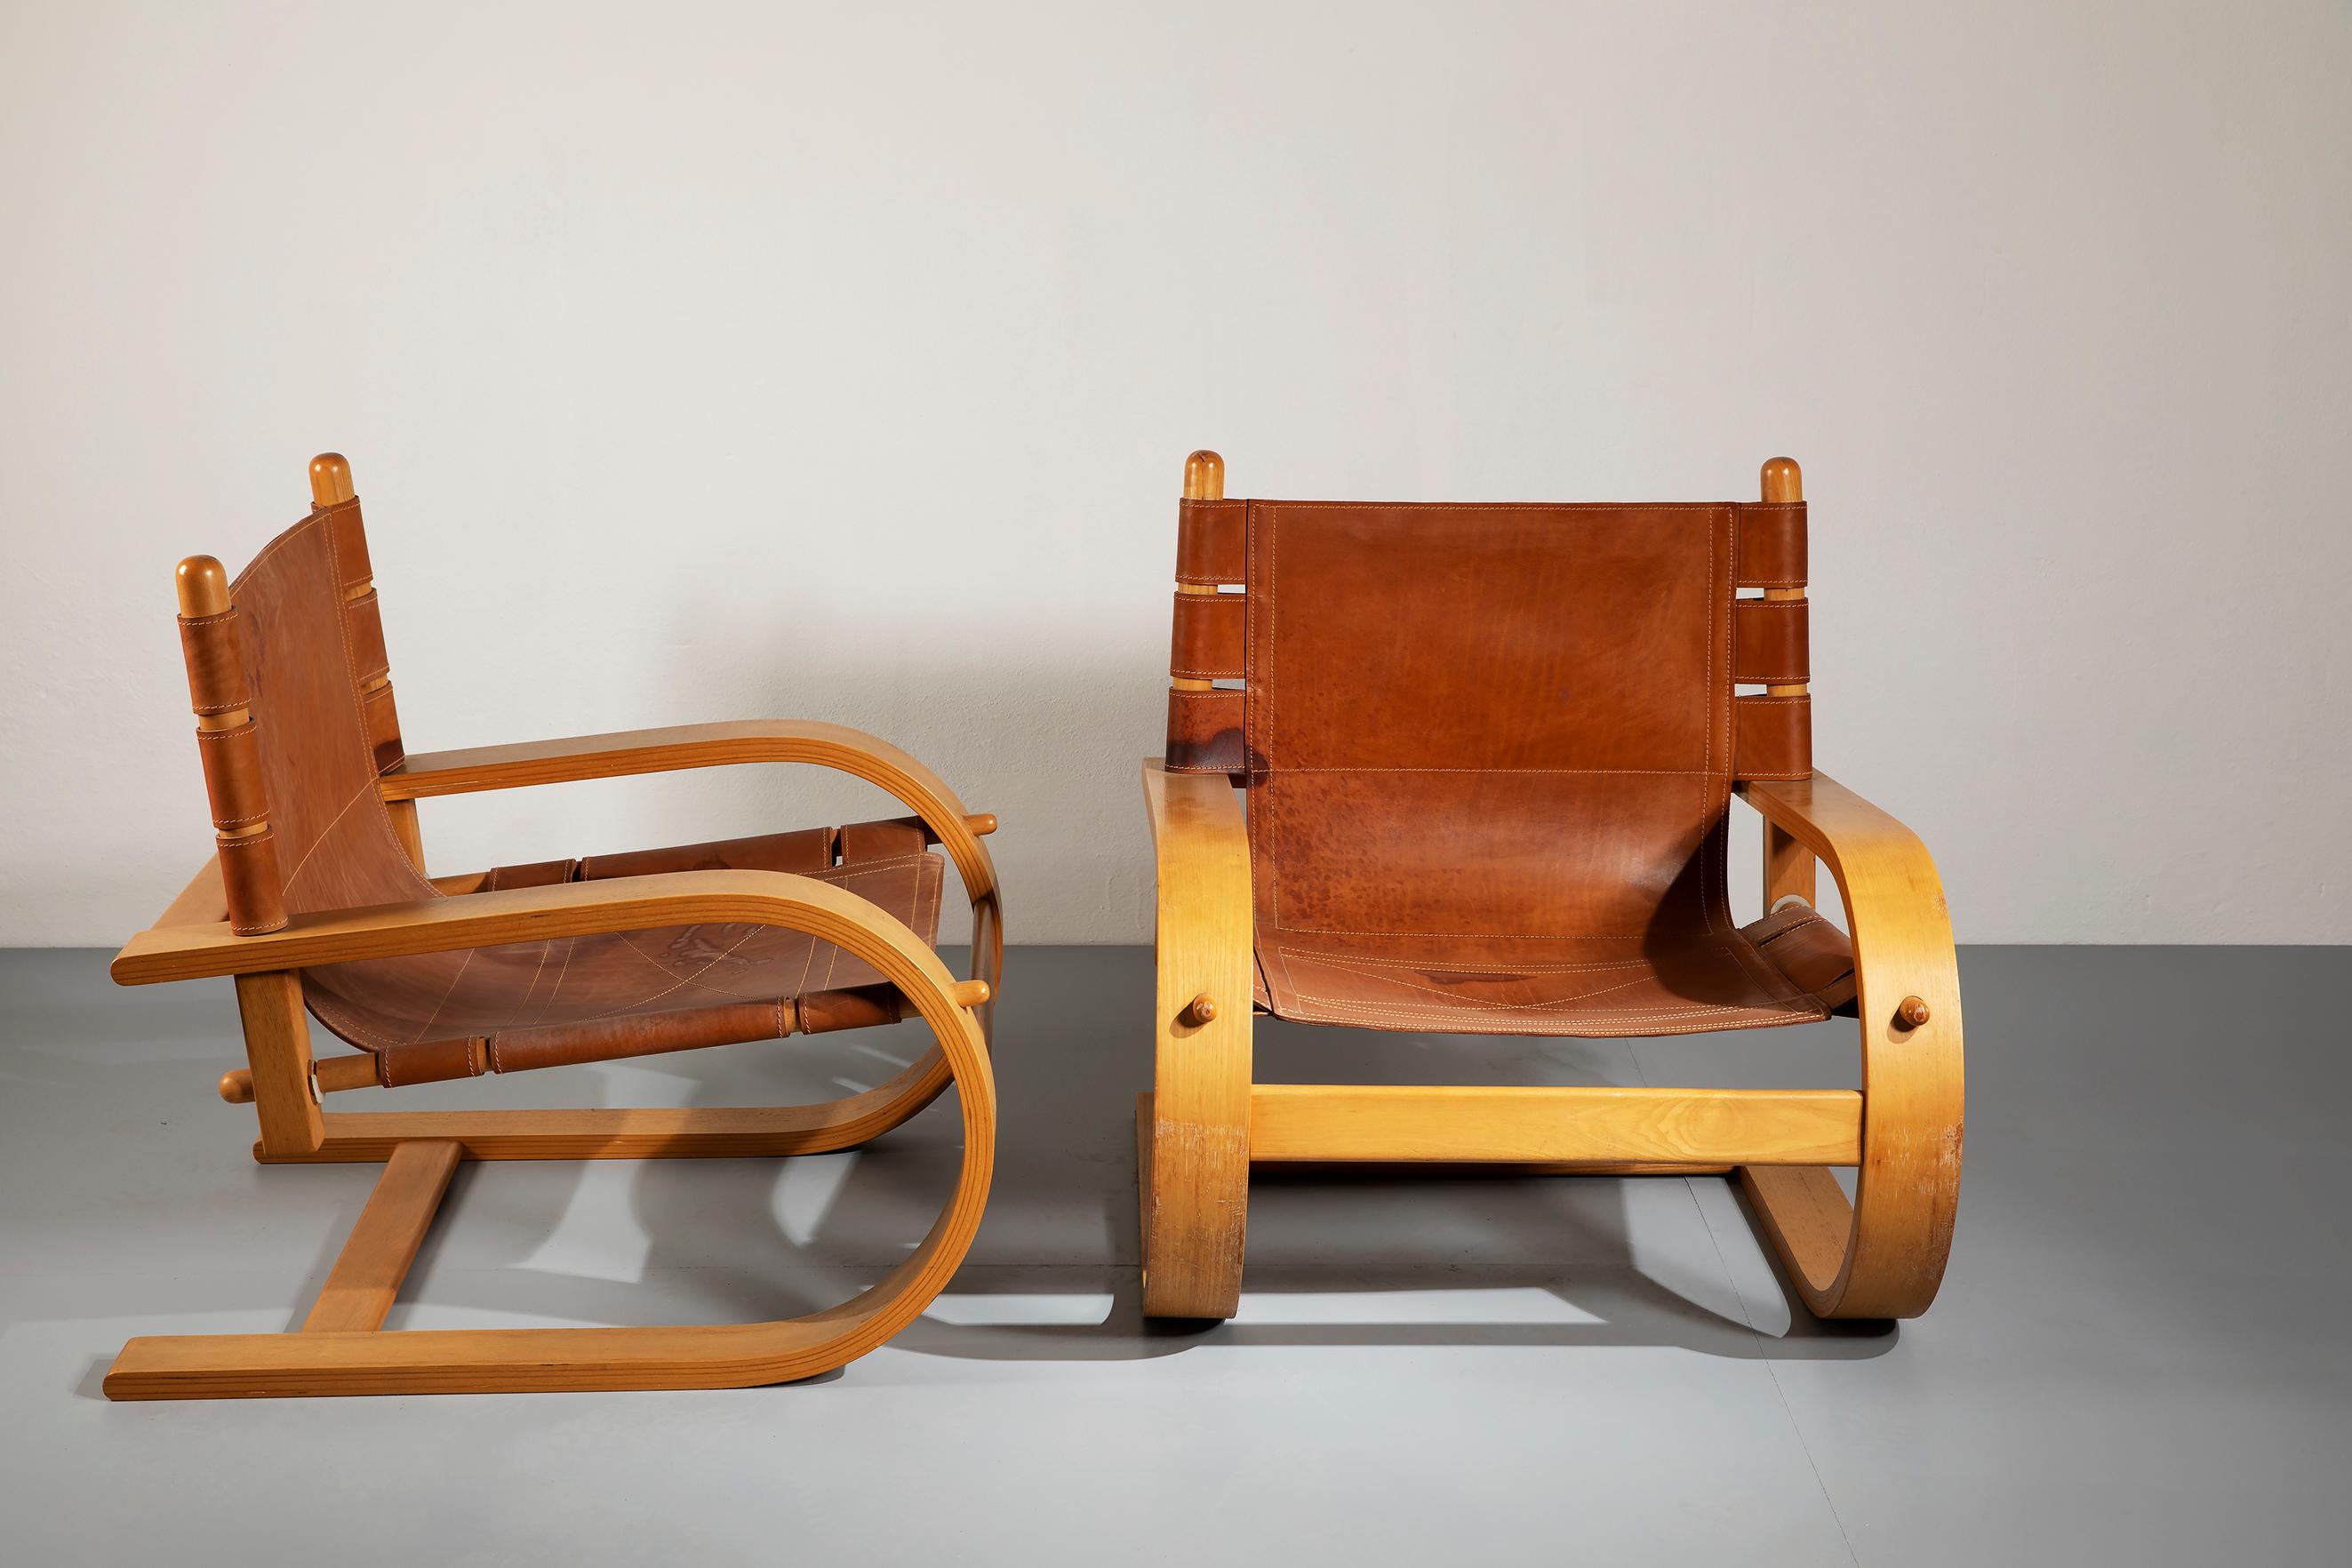 Very rare first model of two 'Scacciapensieri' lounge chairs, designed by italian studio De Pas, D' Urbino, Lomazzi for Poltronova in early 1970s. 
This two cantilever chairs have plywood frames and cognac leather seat and backrest.
This pair is